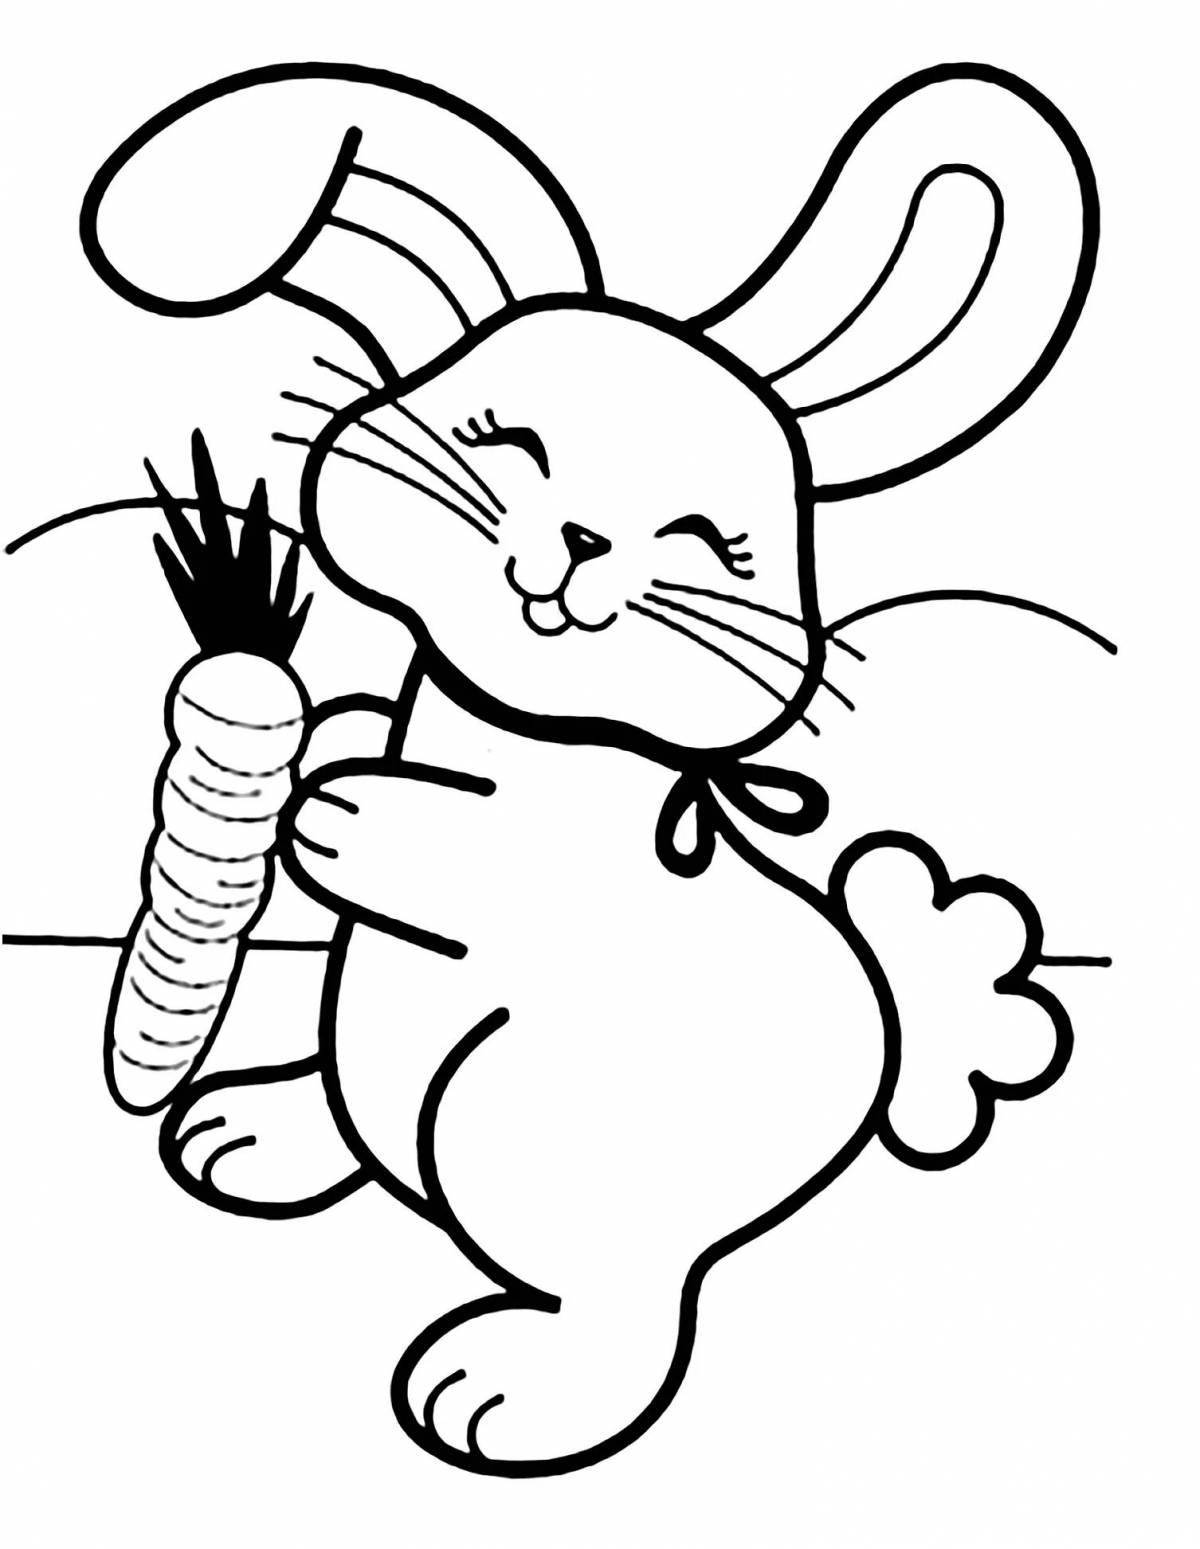 Color-explosion coloring page bunny with carrot for kids